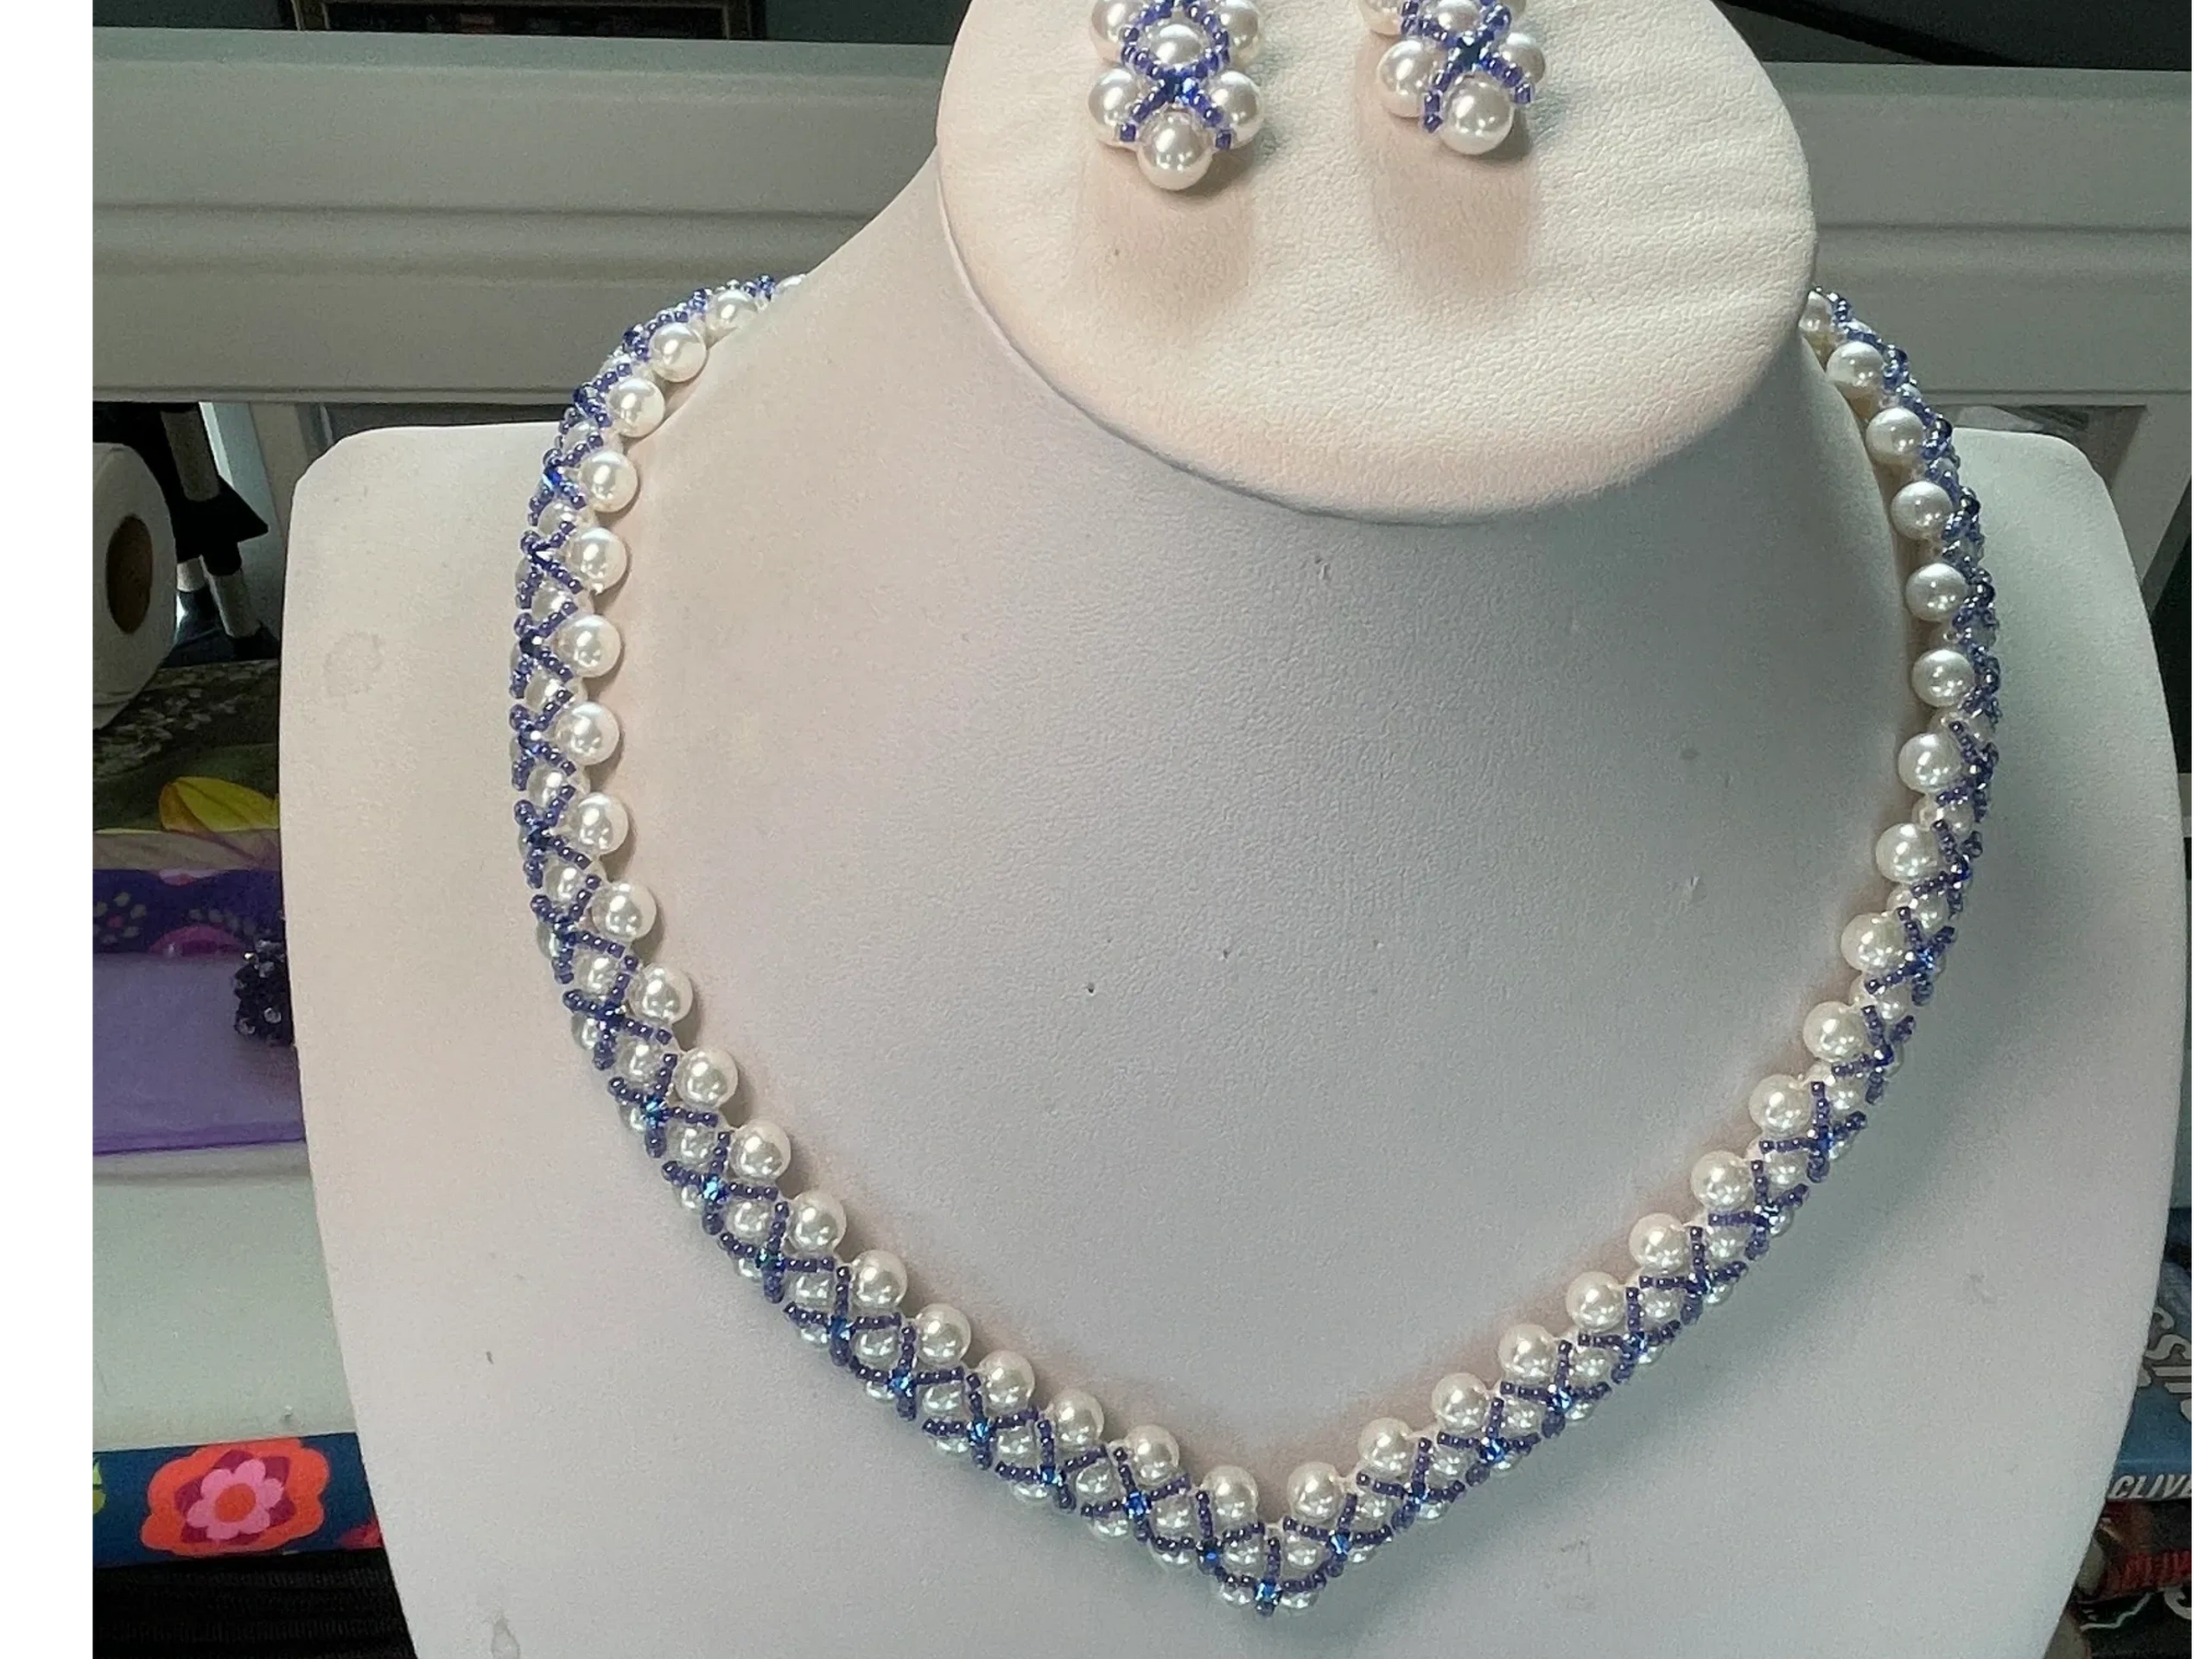 Pearl Necklace with Crystal Montee's with Earrings-Various Colors - Made to Order.  $135.00 